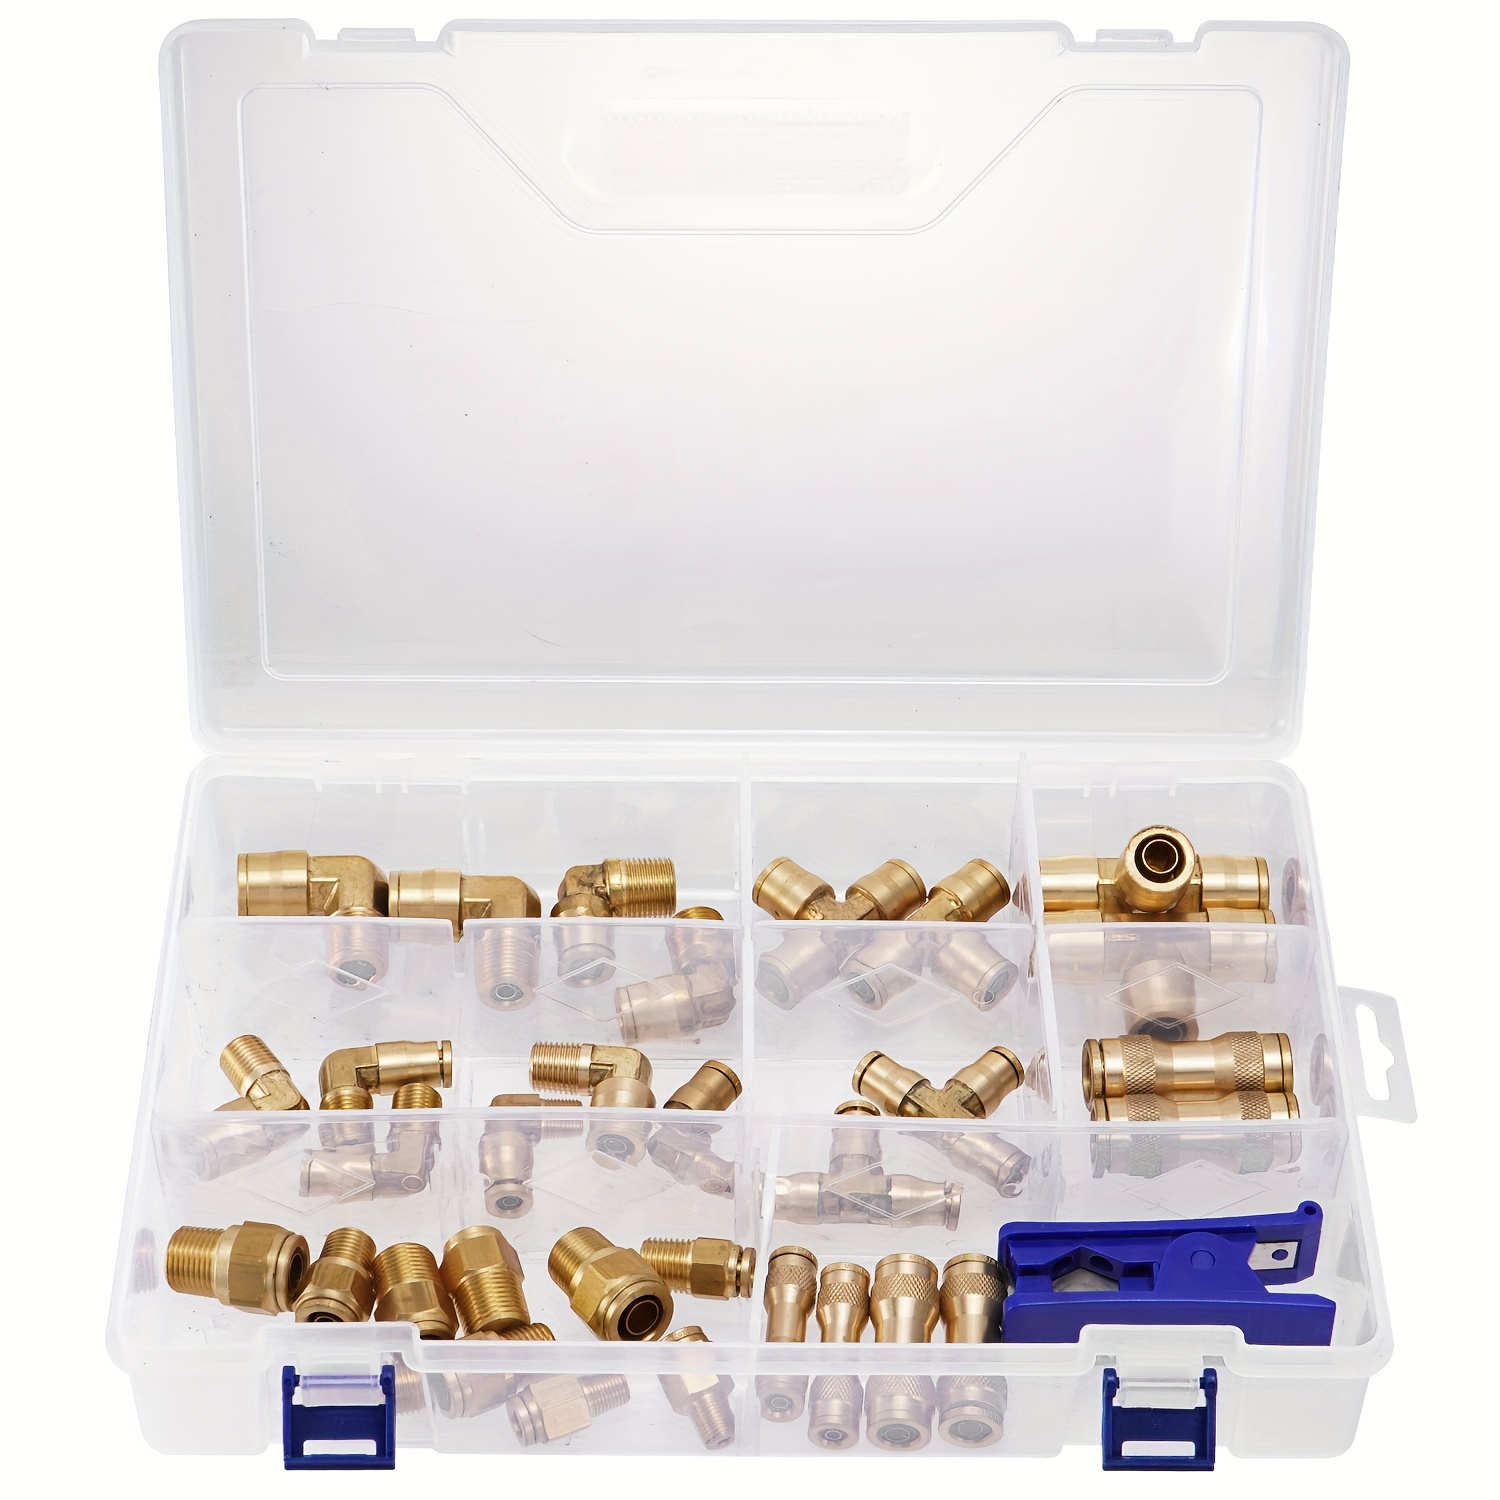 

33pcs Brass Dot Air Brake Line Fittings Kit 1/4" 3/8" 1/2" Push To Connect Fittings Quick Connect For Truck Or Fuel Water Oil Gas System